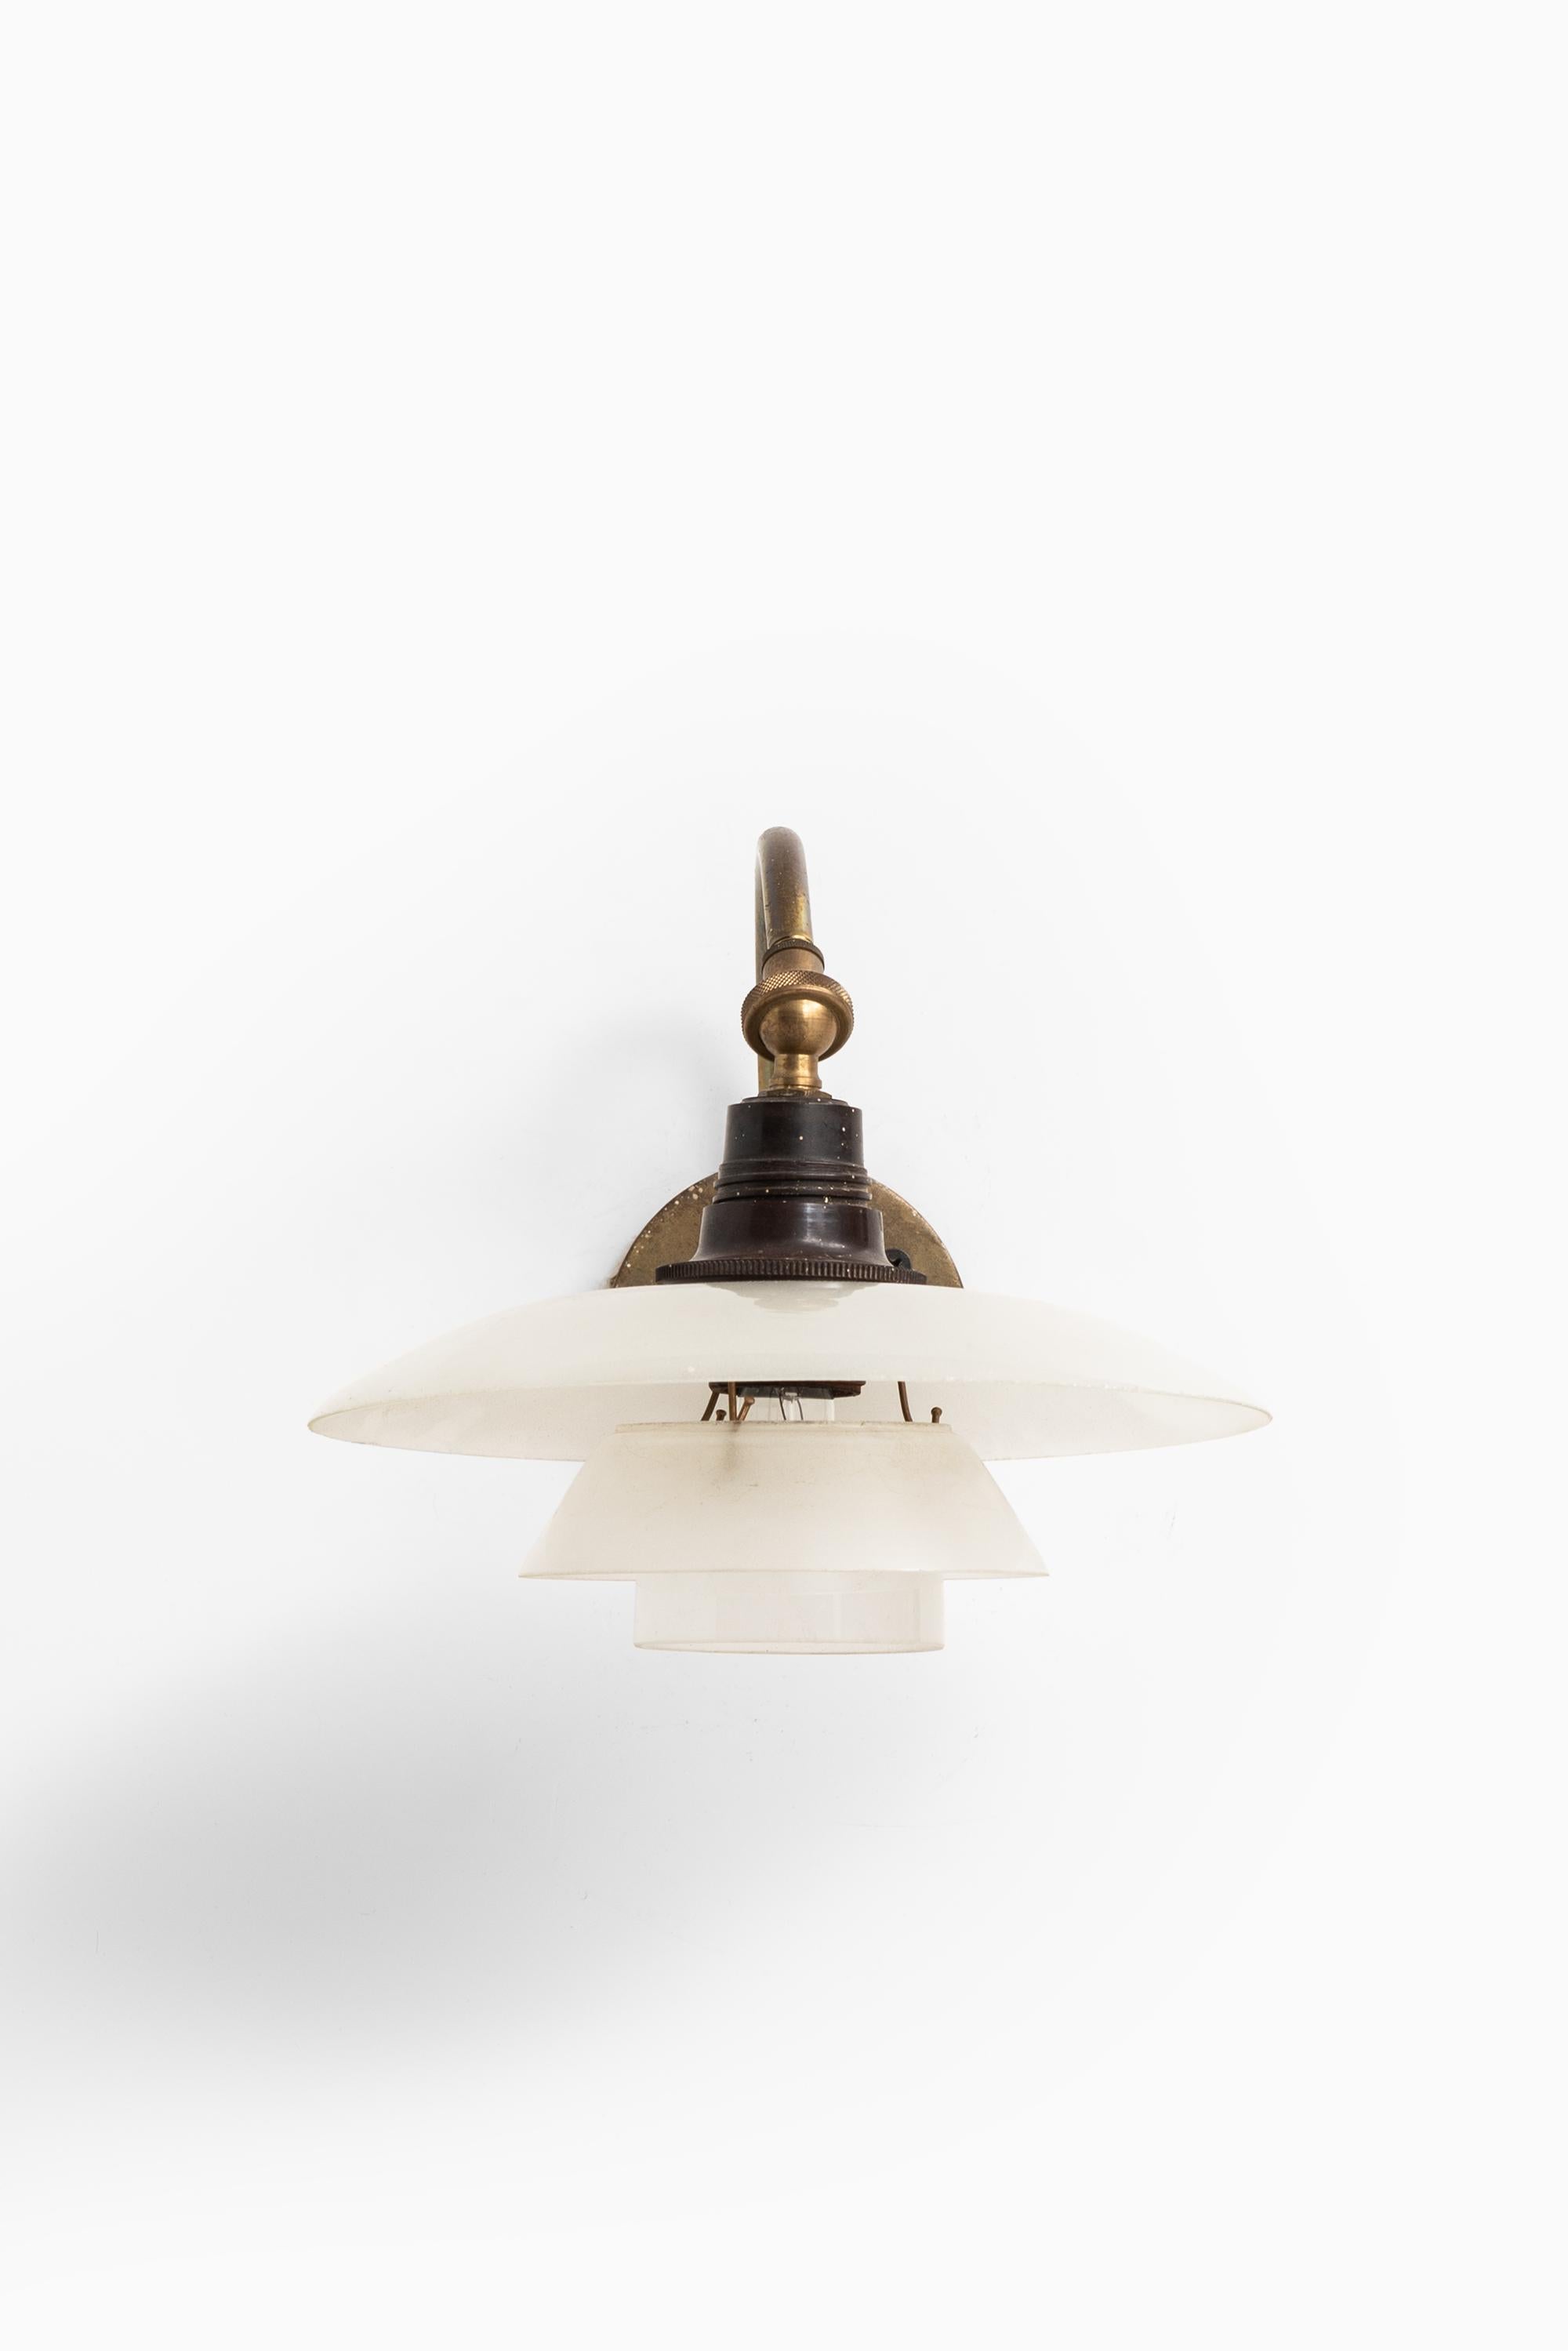 Rare wall lamp model PH-1/1 designed by Poul Henningsen. Produced by Louis Poulsen in Denmark.